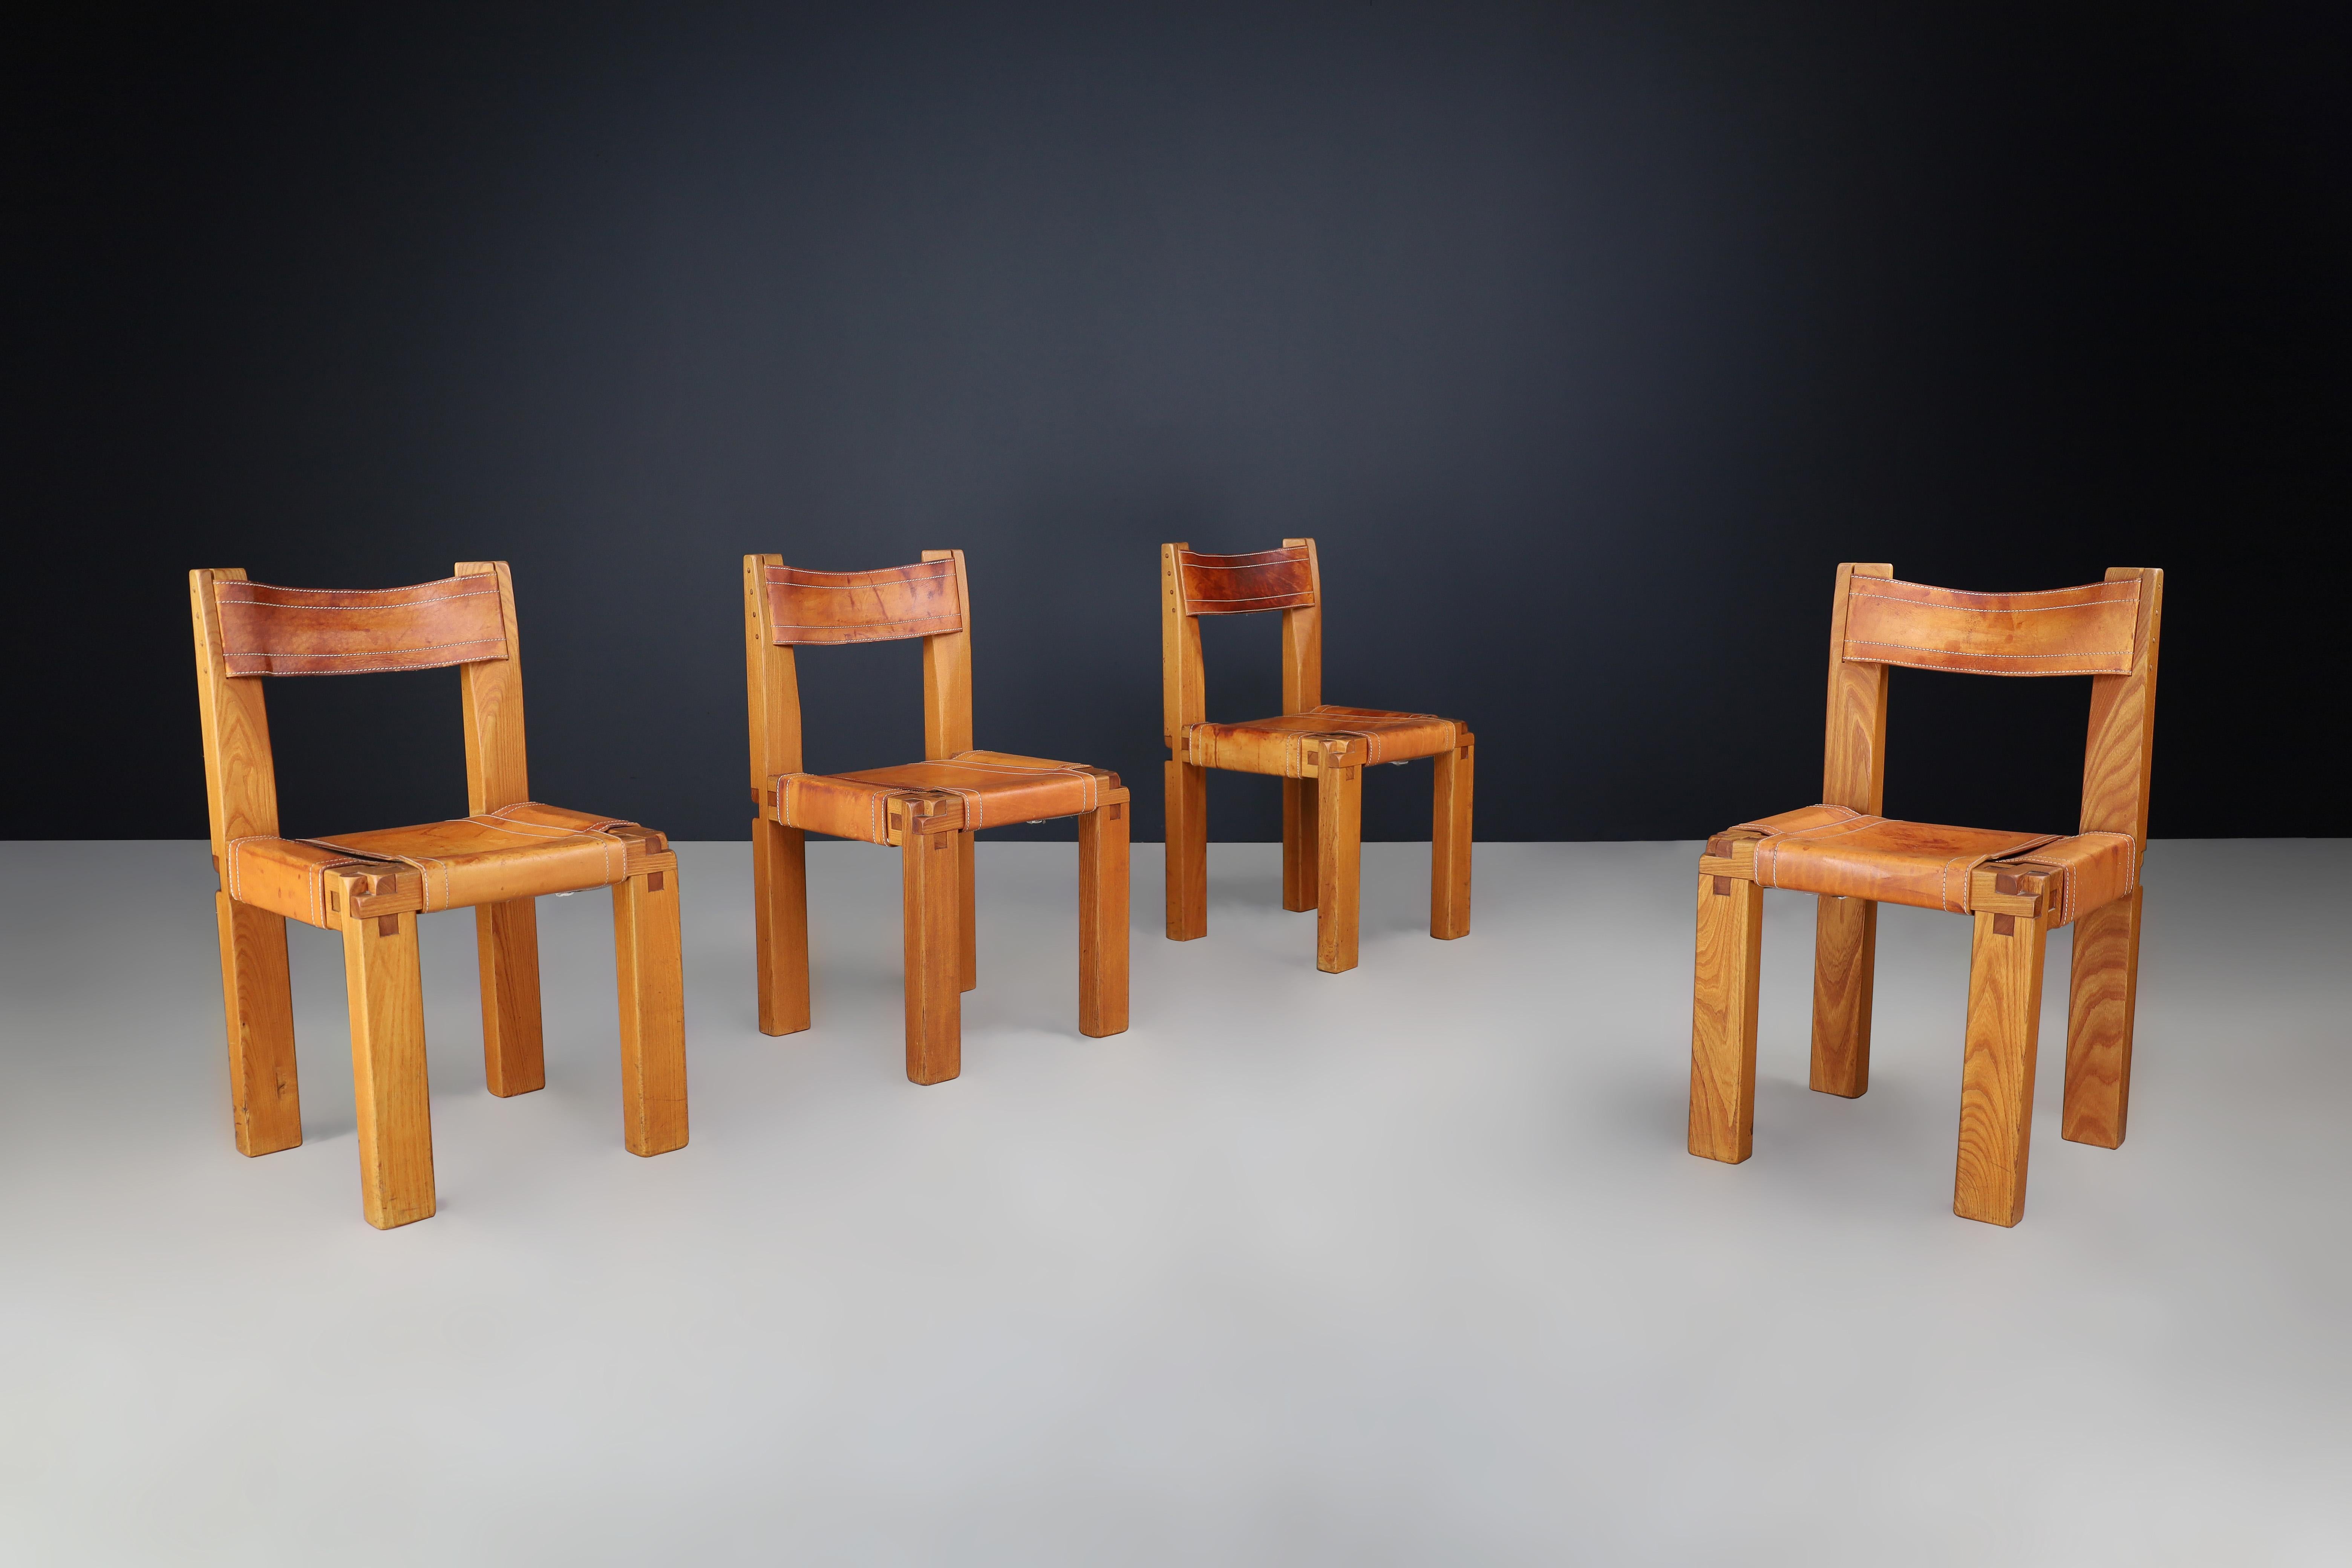 Pierre Chapo Set of Four 'S11' Chairs in Cognac Leather and Elm, France 1960s

These are a set of four dining chairs designed by Pierre Chapo, model 'S11', crafted in France in the 1960s. These chairs are an early edition and are made of solid